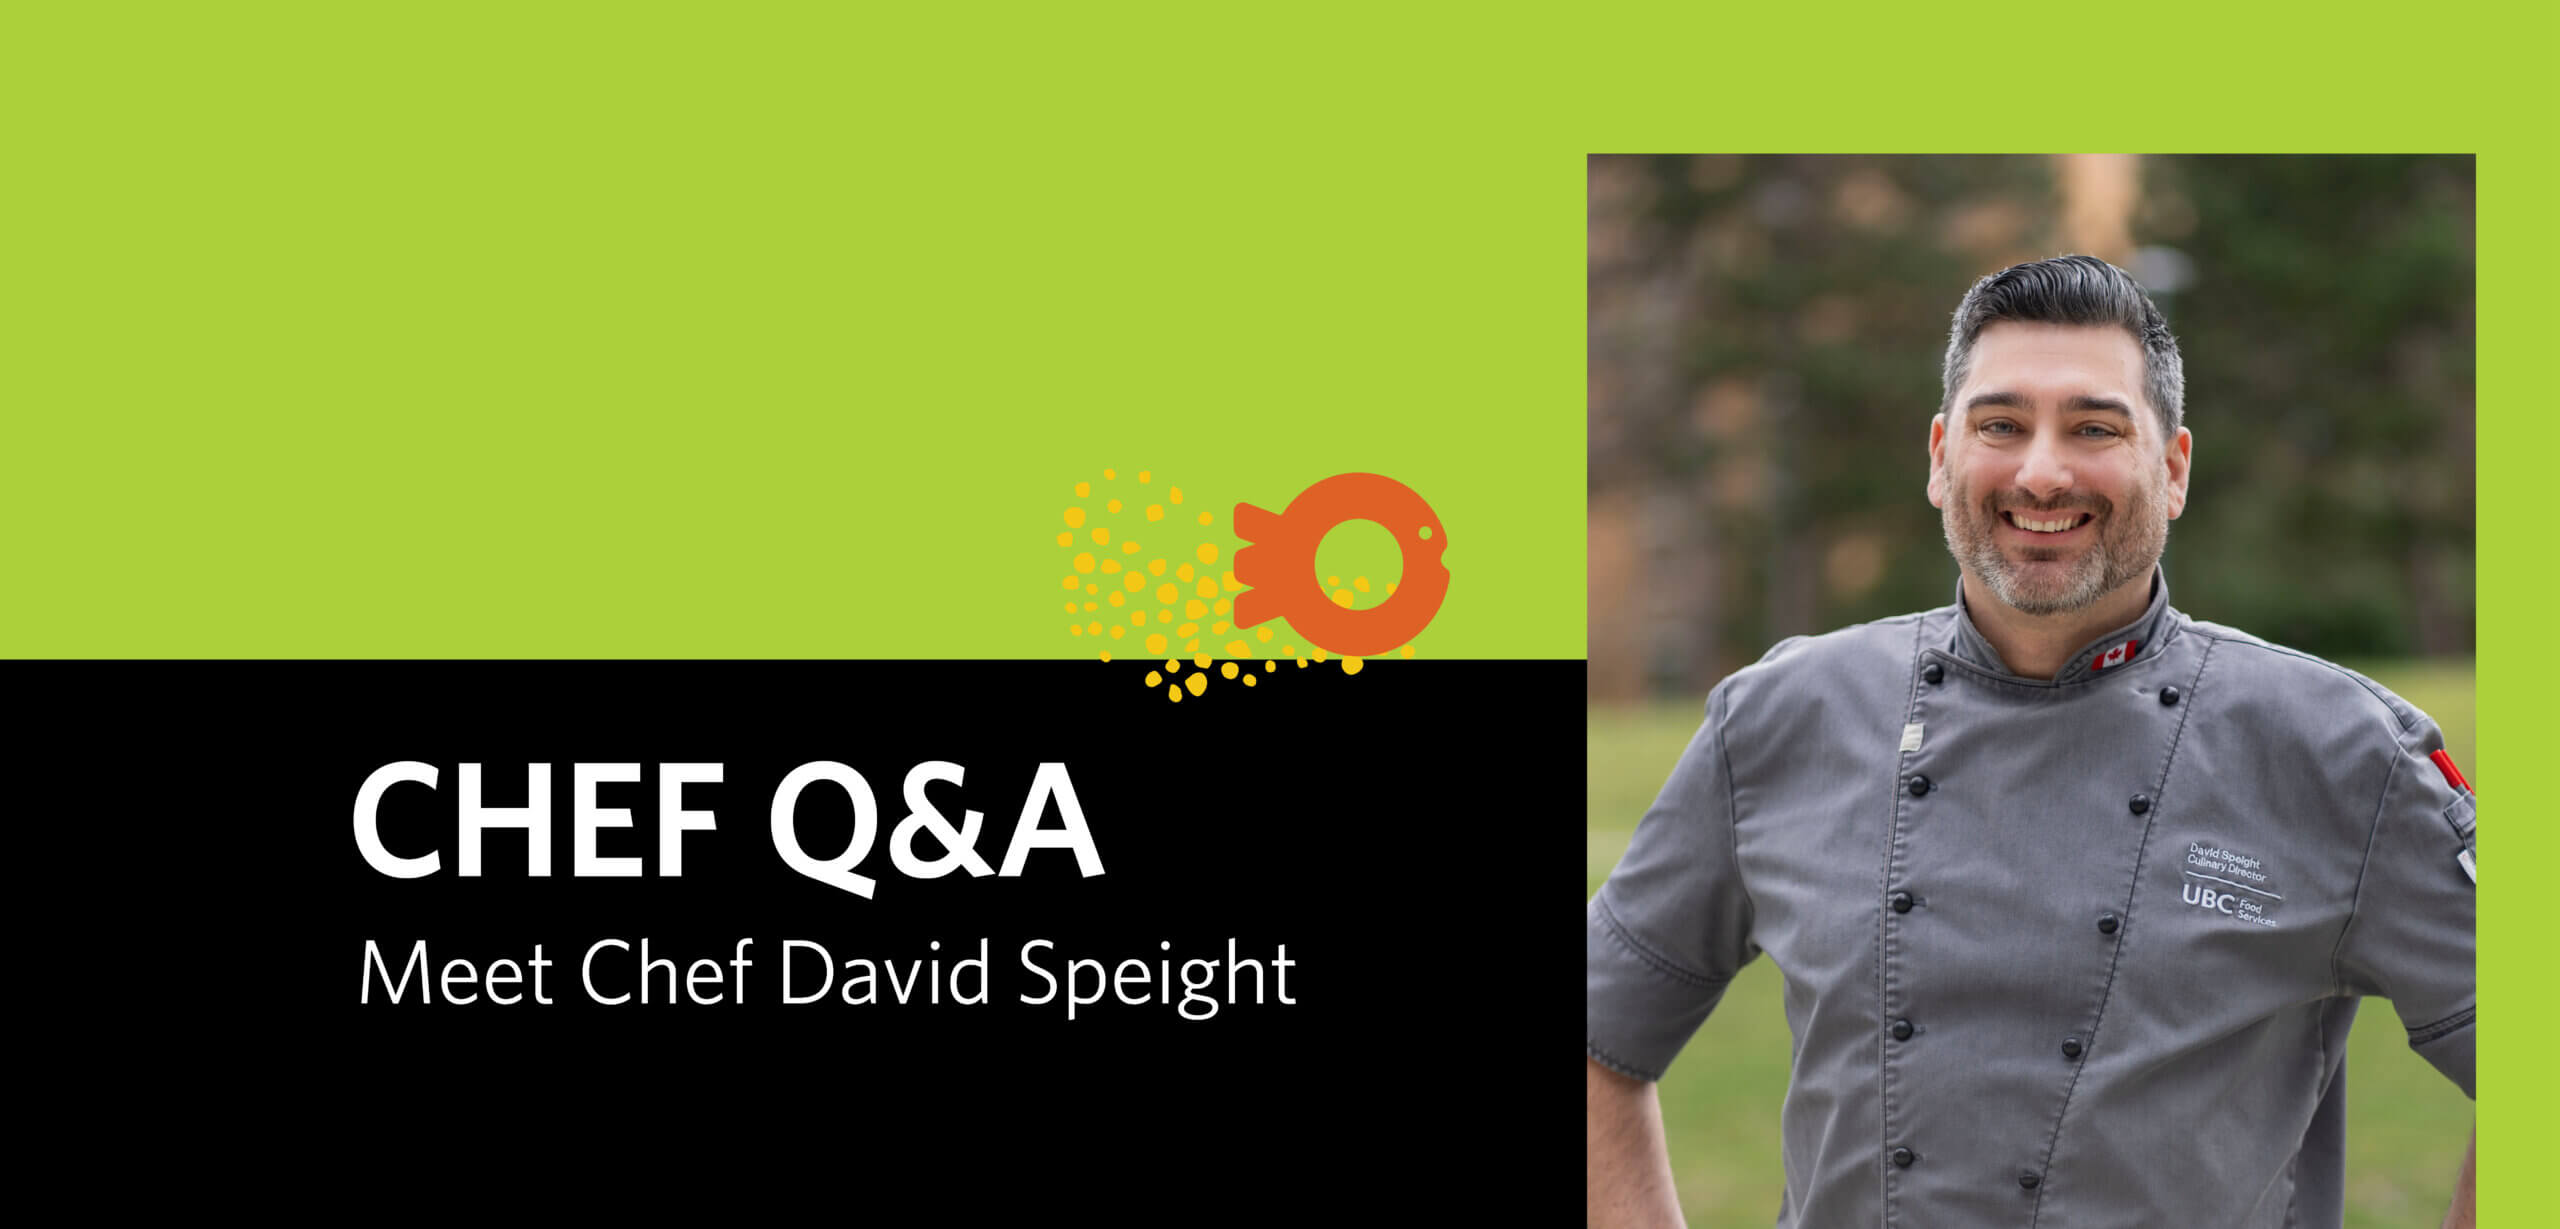 Image of Executive Chef David Speight beside the text "CHEF Q&A: Meet Chef David Speight" with an illustration of a fish